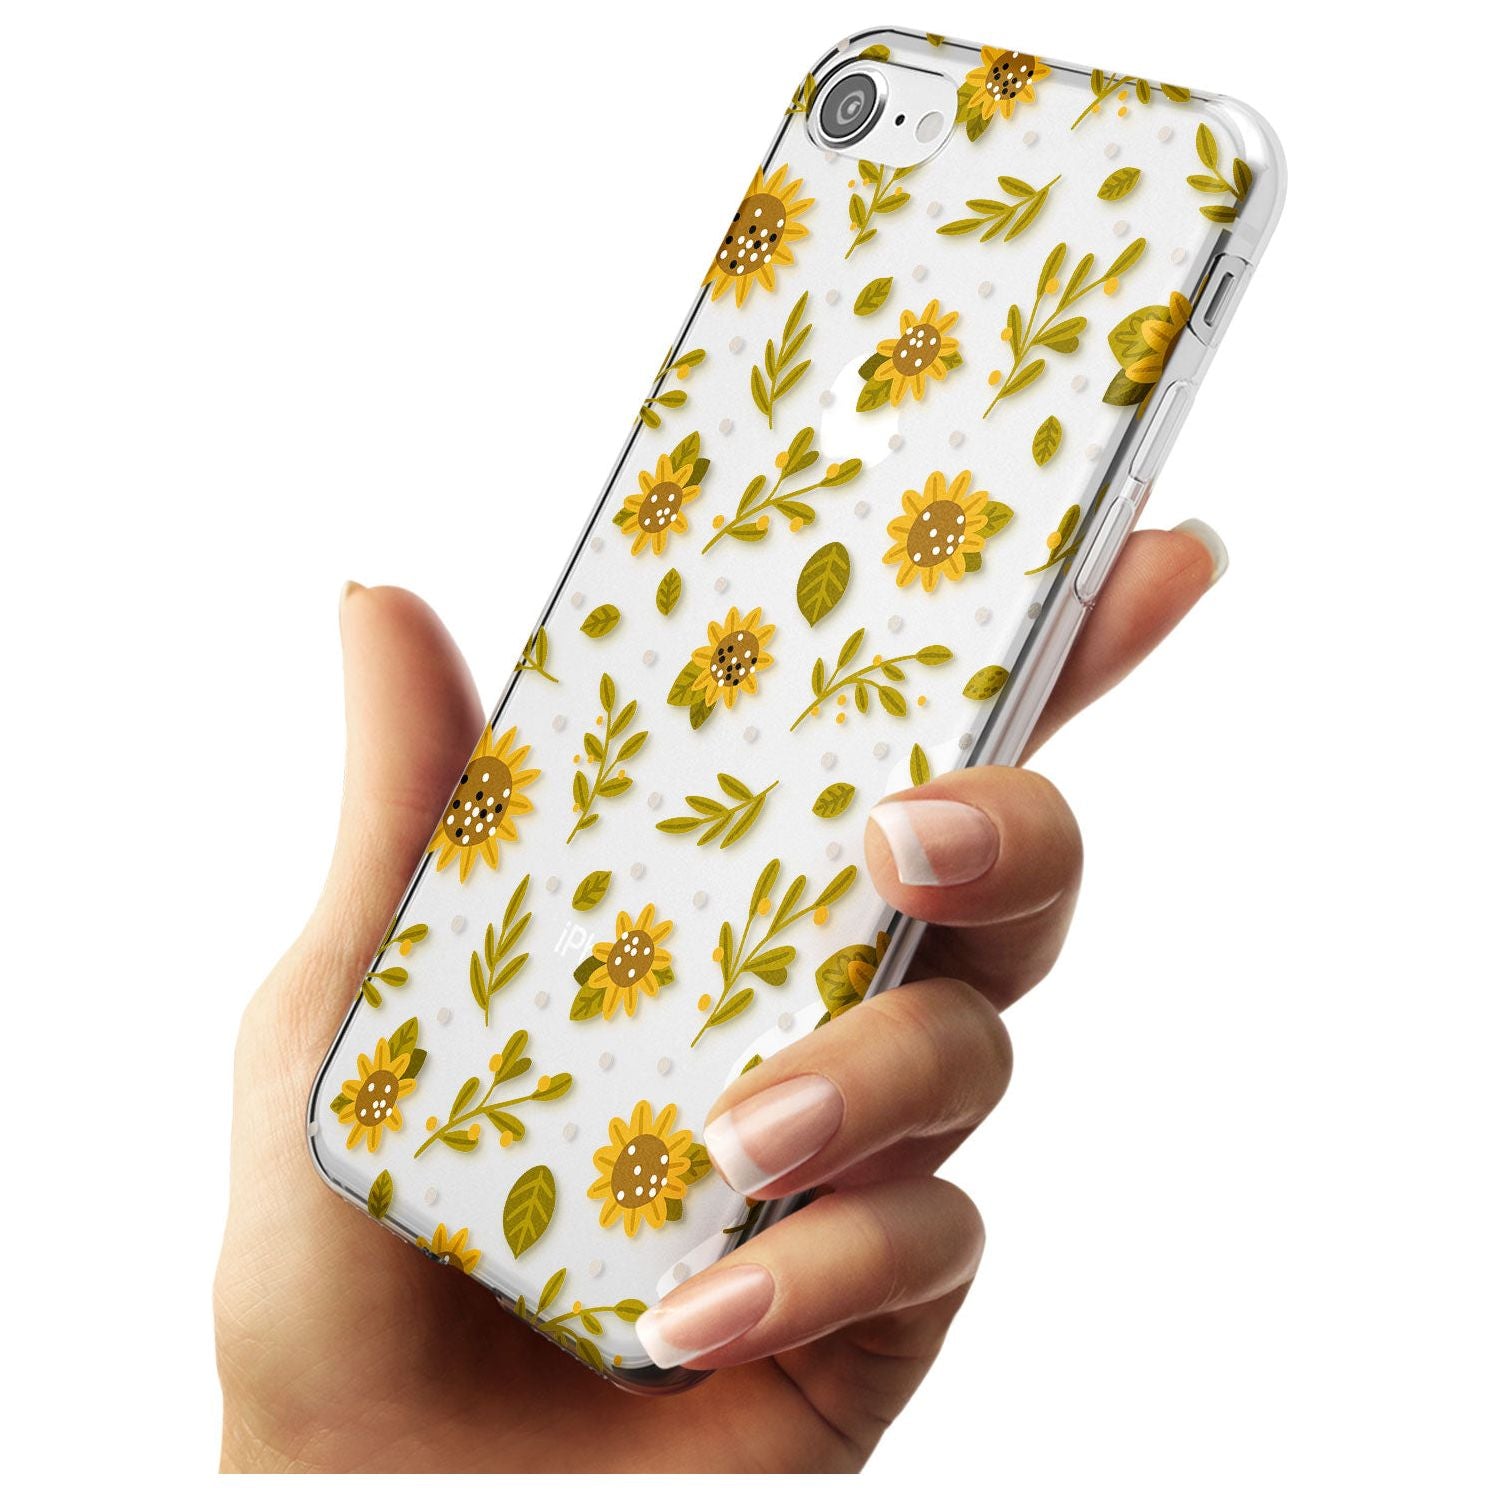 Sweet as Honey Patterns: Sunflowers (Clear) Slim TPU Phone Case for iPhone SE 8 7 Plus